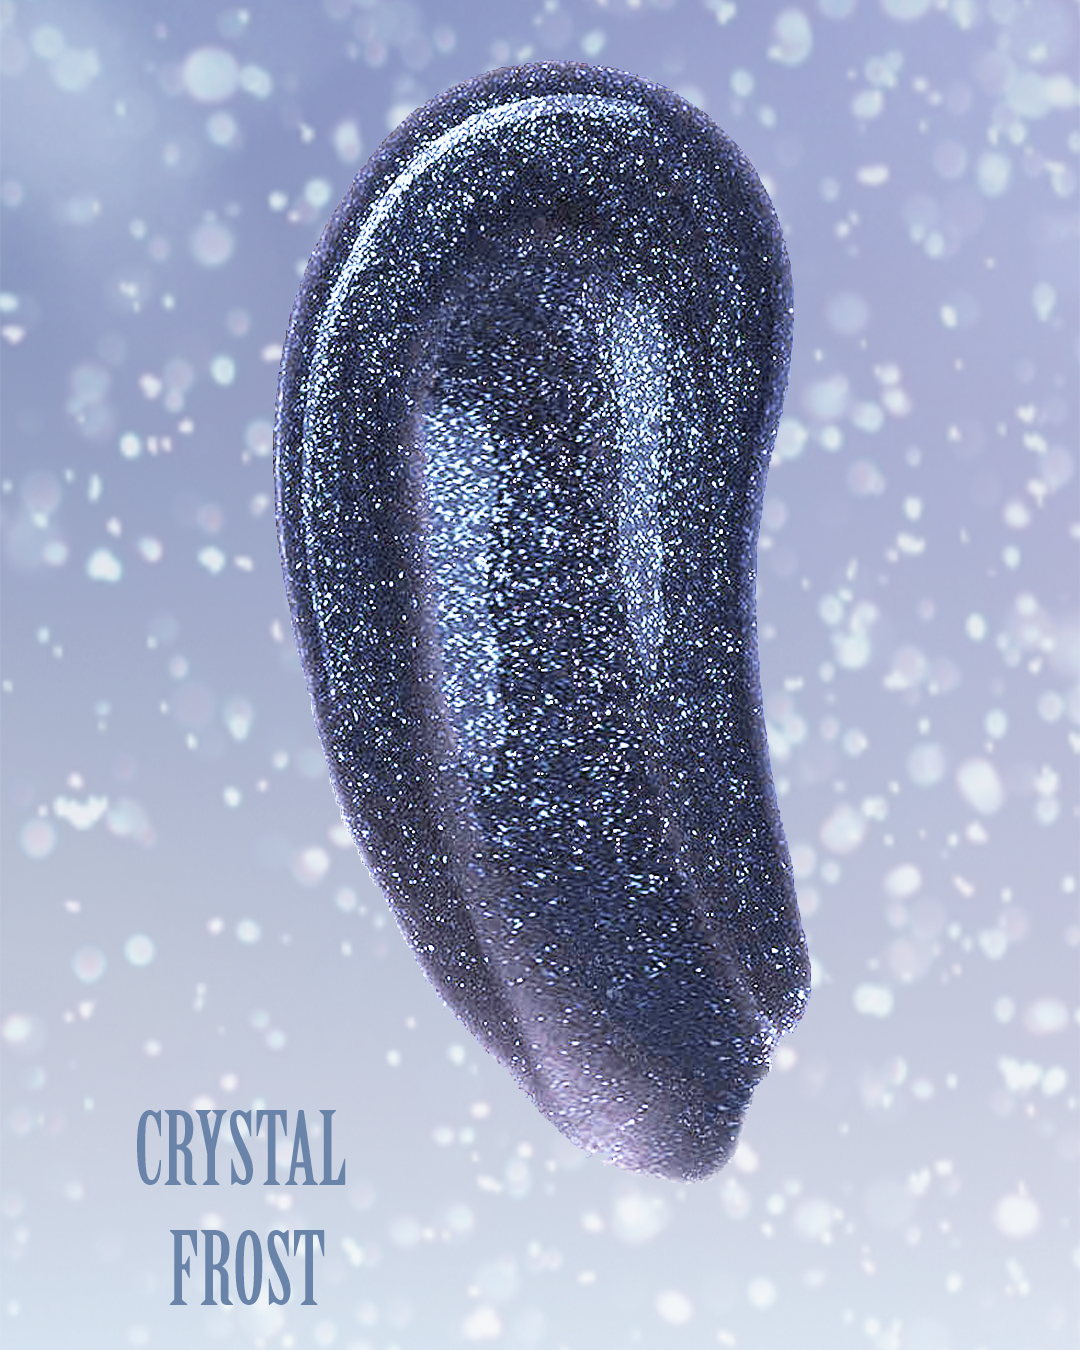 CRYSTAL FROST